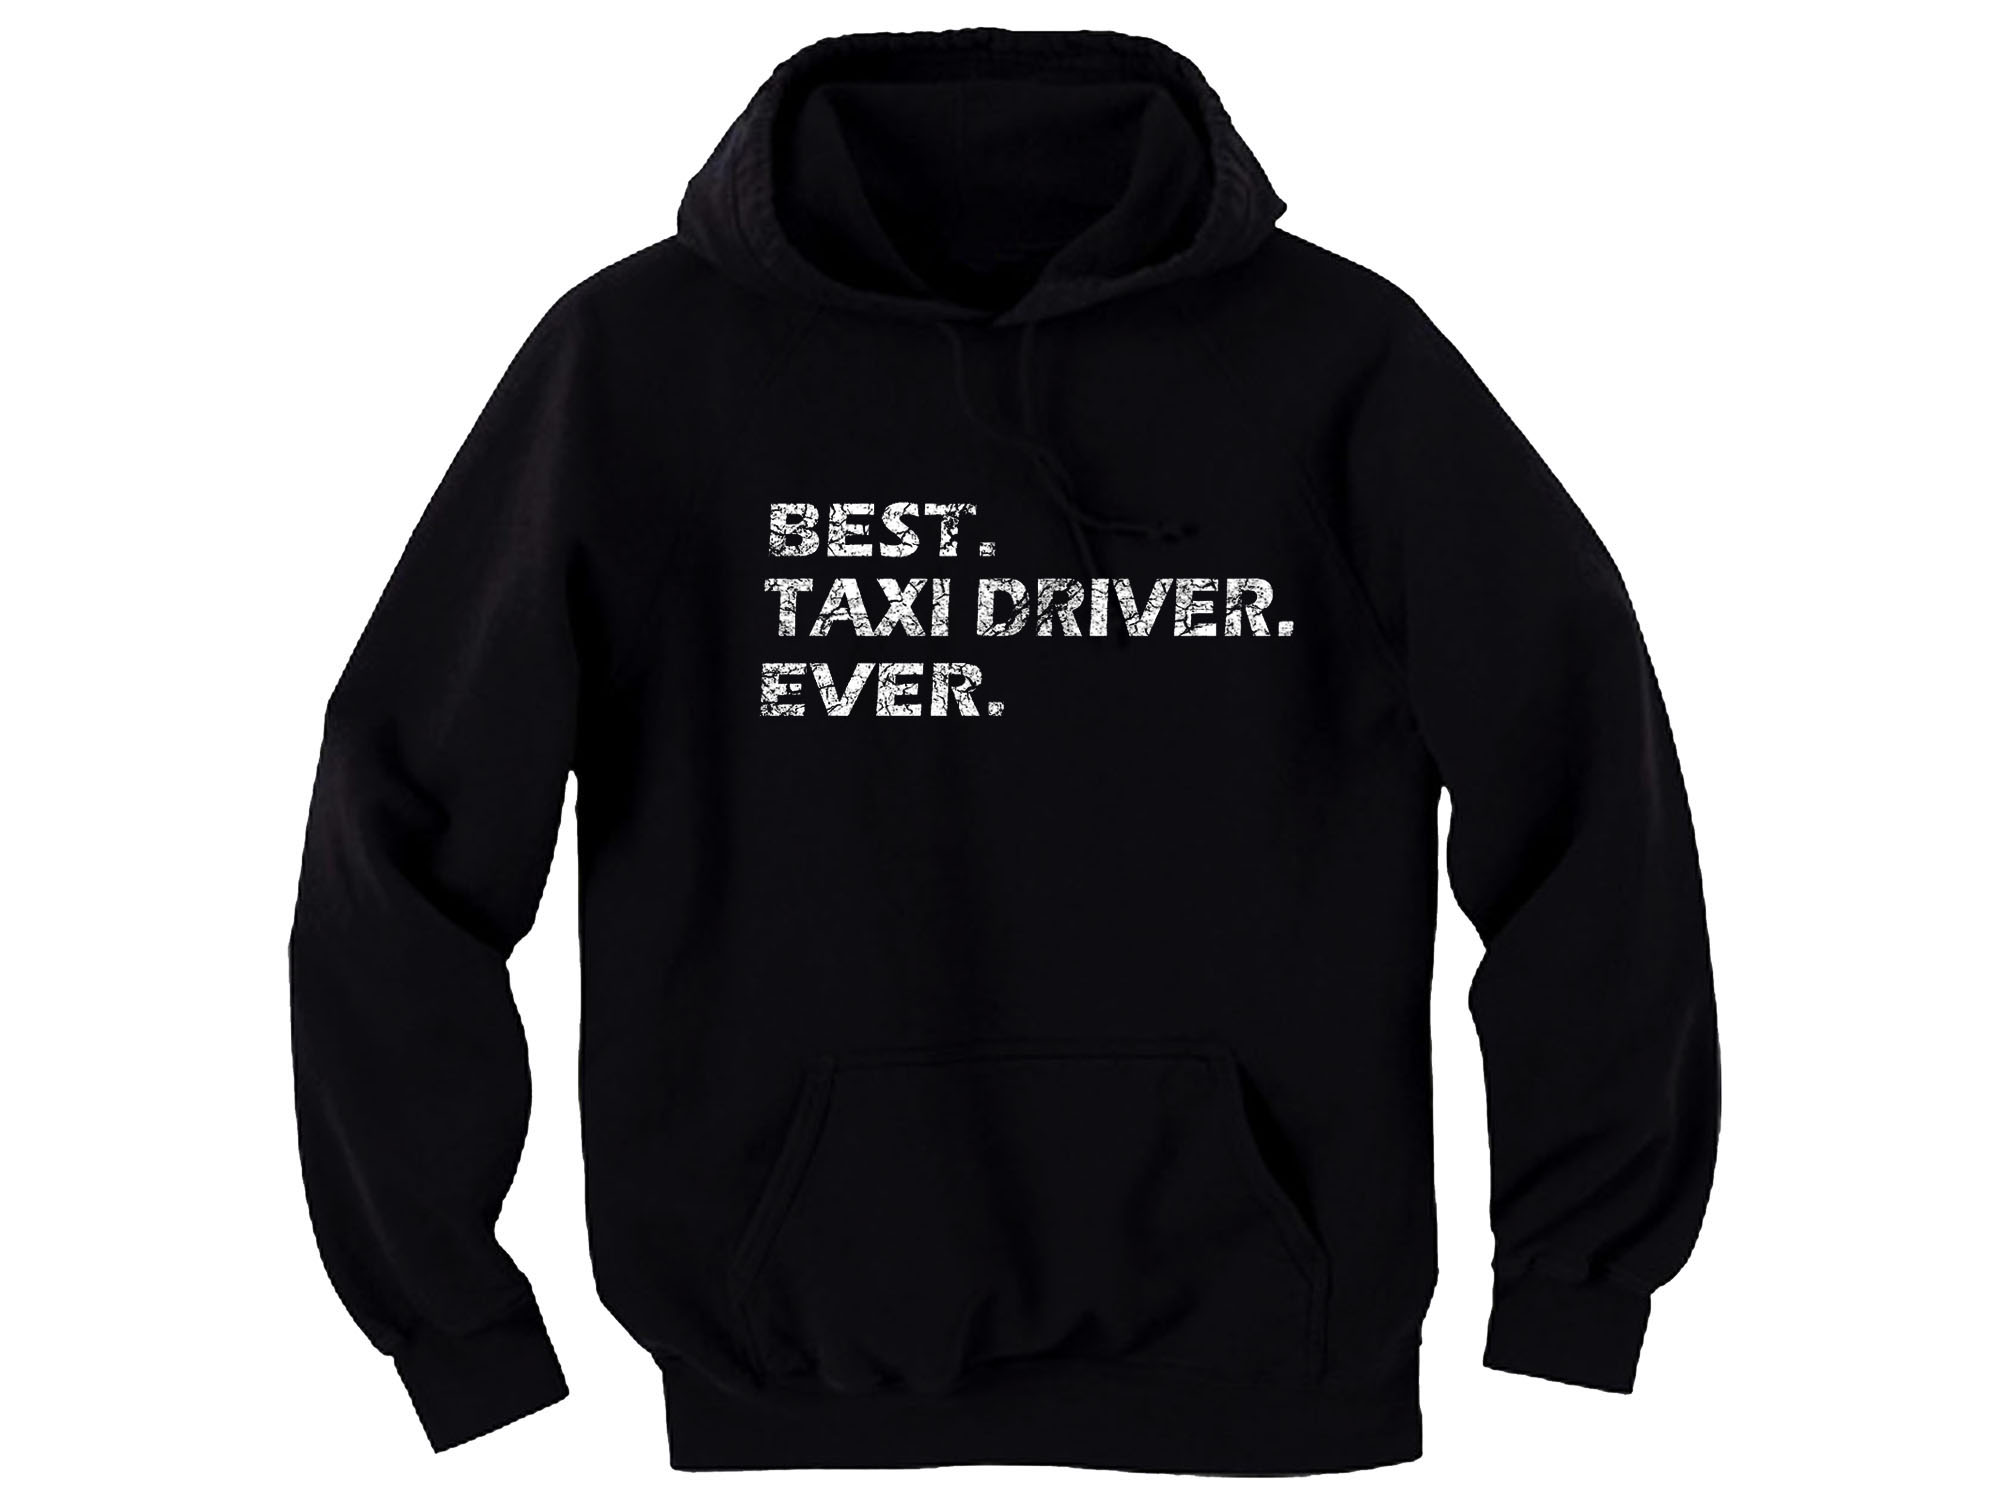 Best taxi driver ever distressed print hoodie coworker,father,friend gift